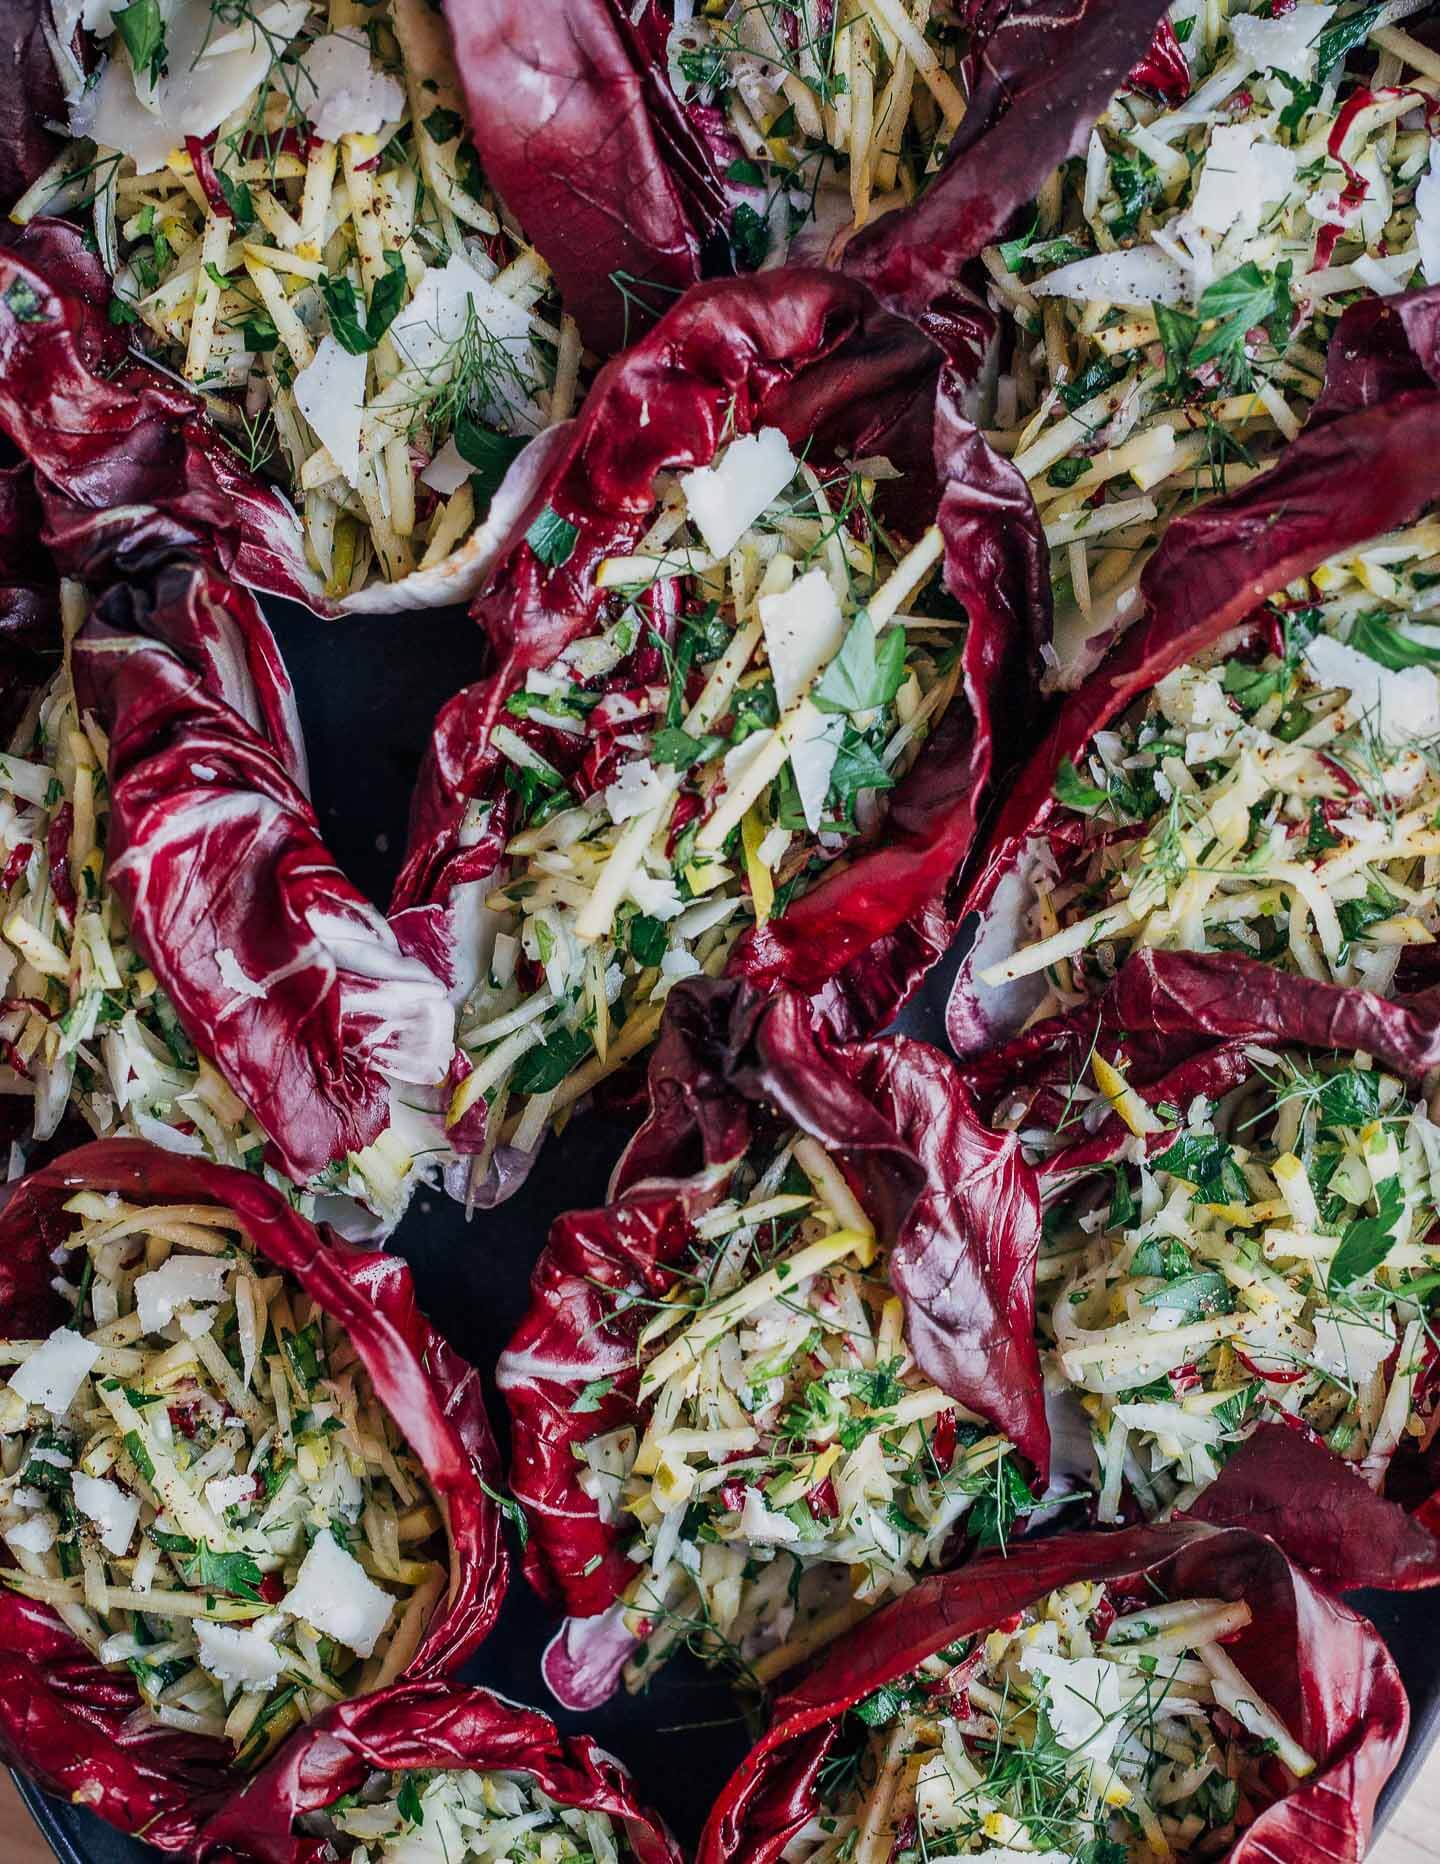 A platter with colorful salad cups made with radicchio, apple, and fennel. 